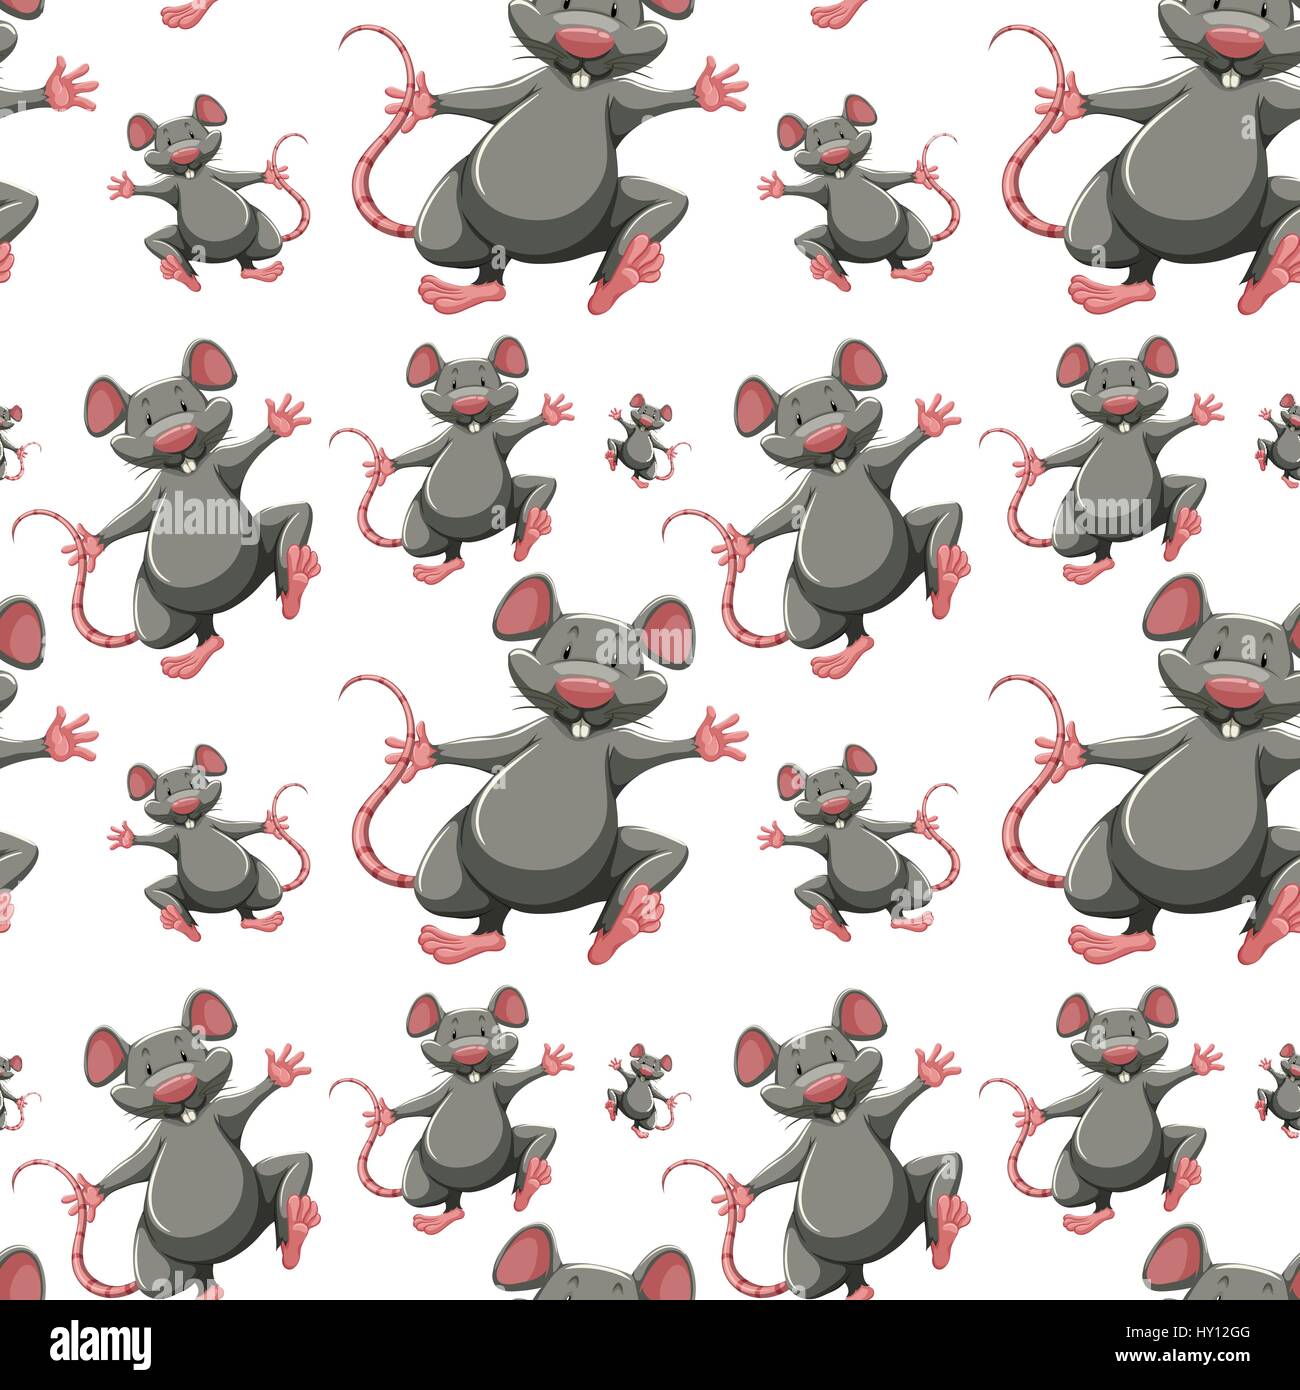 Seamless background with many rats illustration Stock Vector